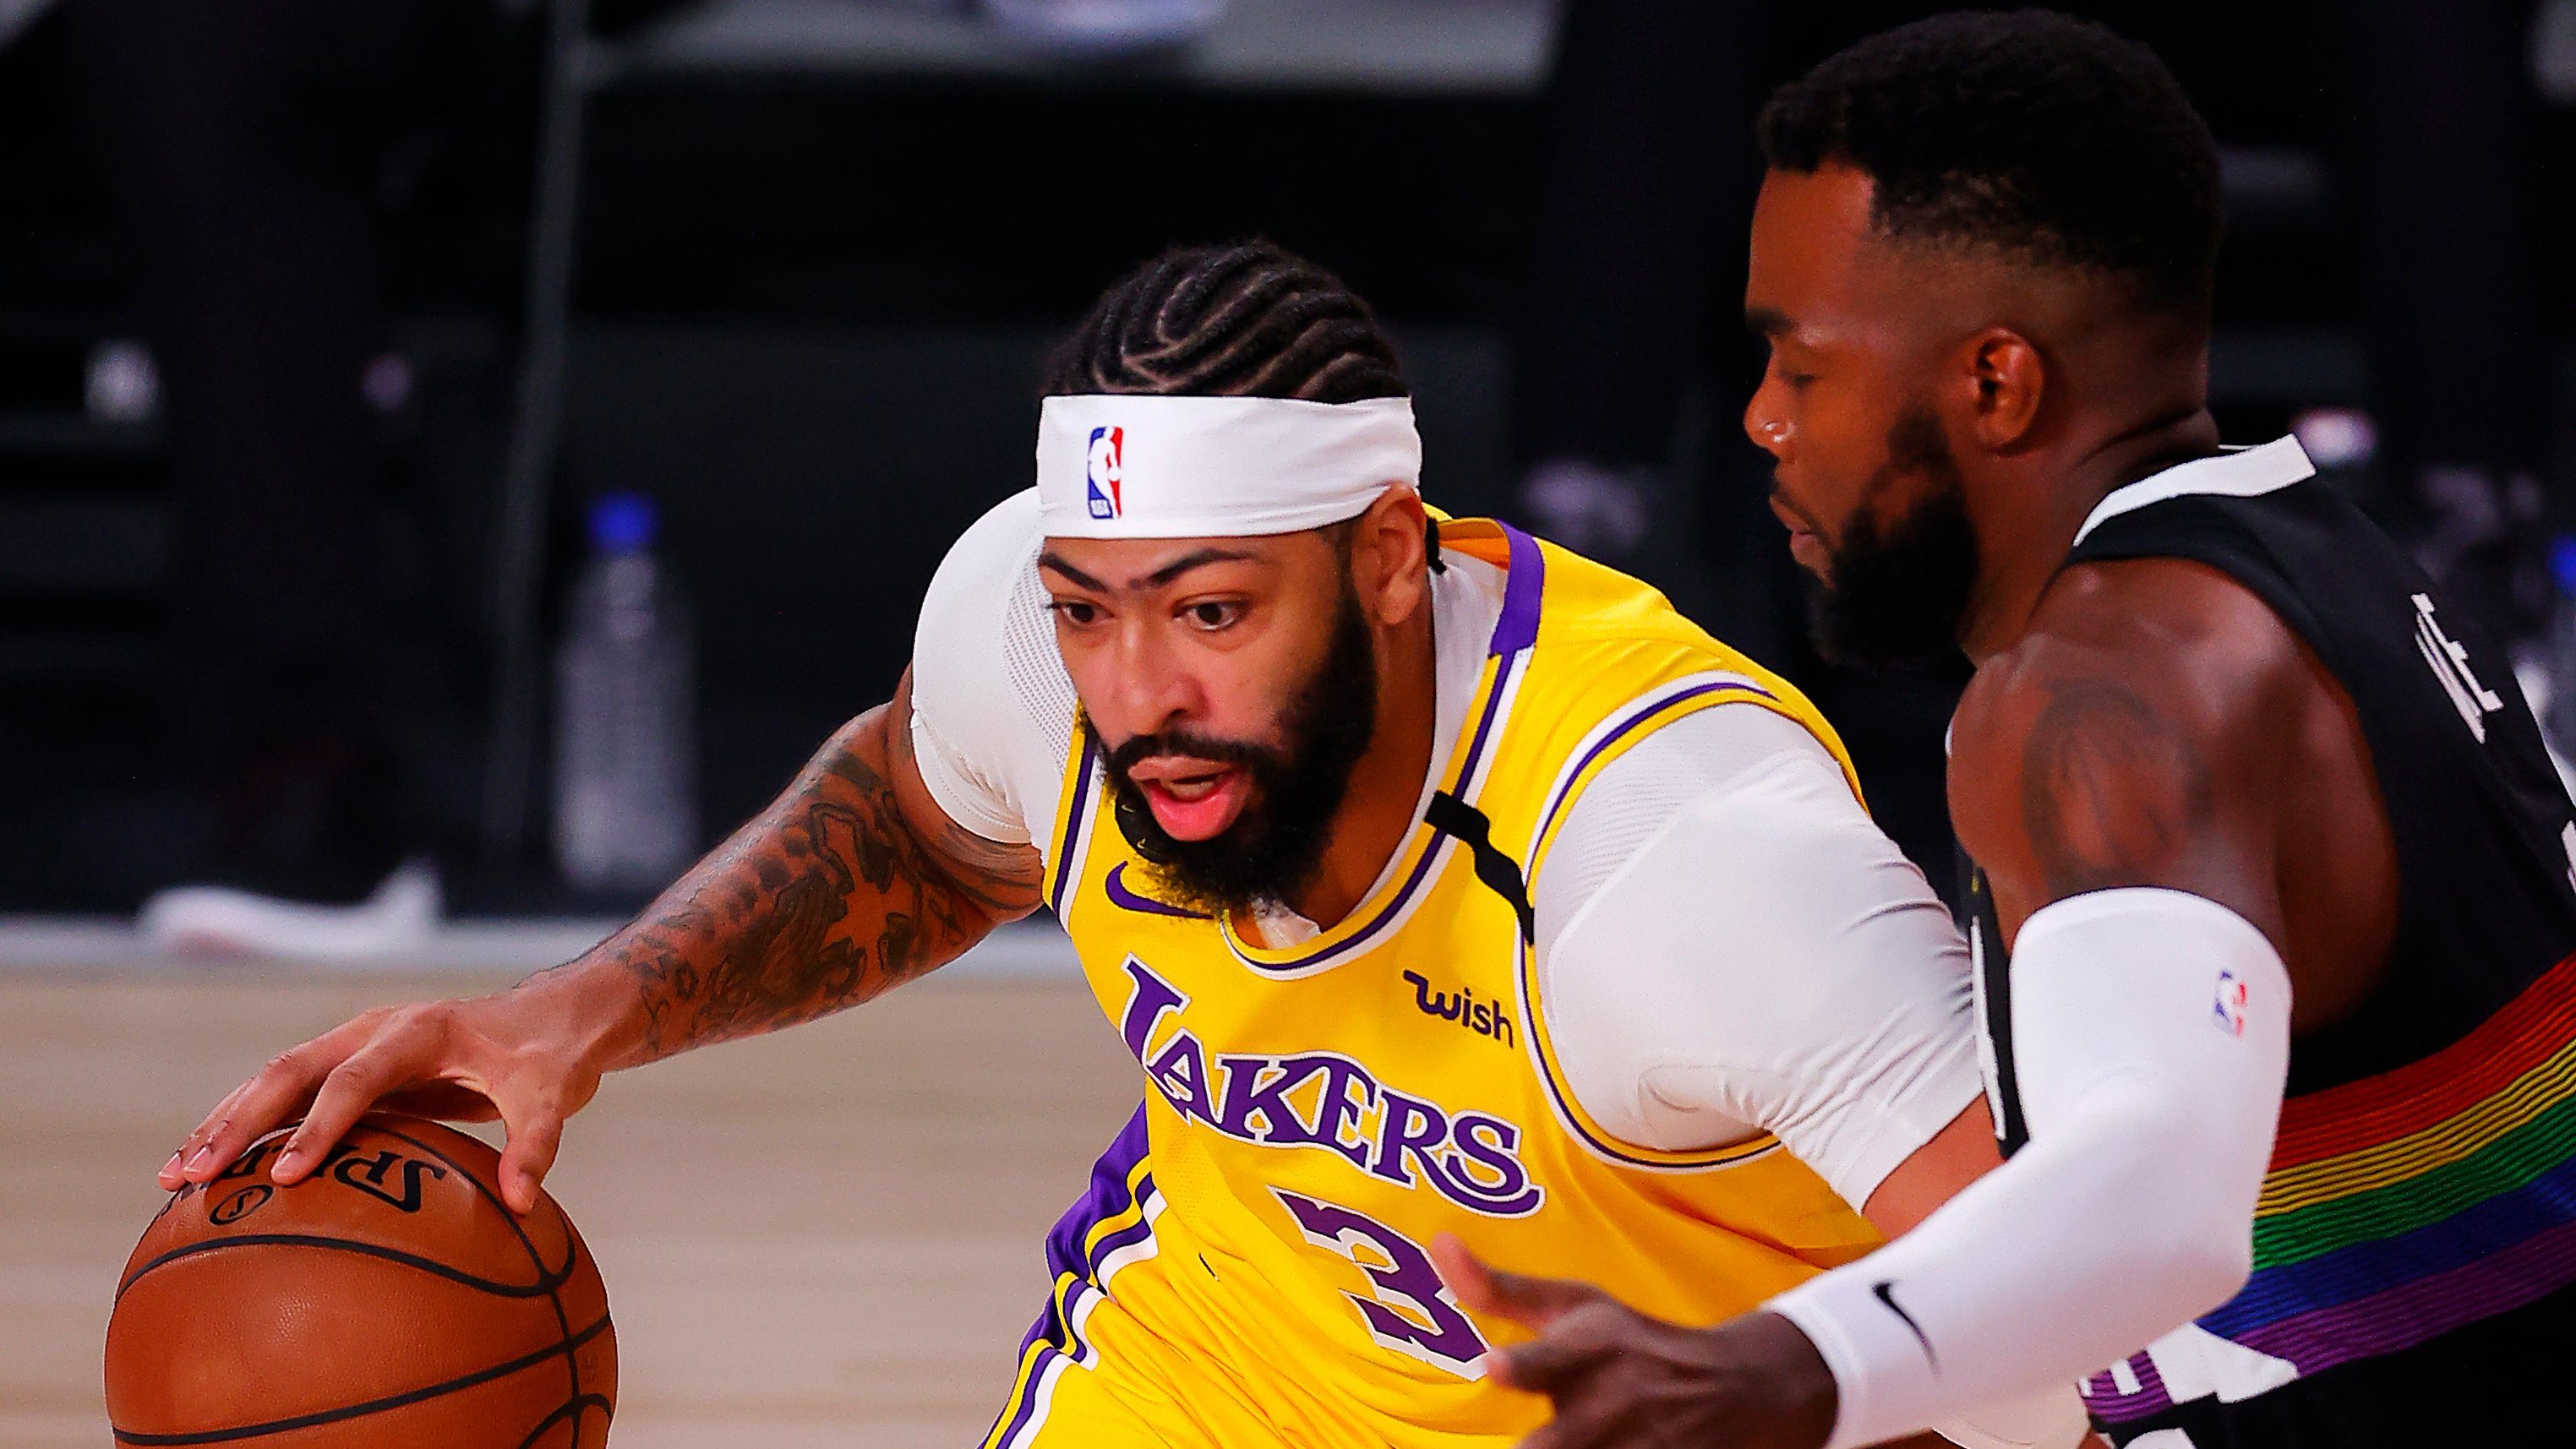 NBA Finals within reach as Lakers trounce Nuggets in Game 4